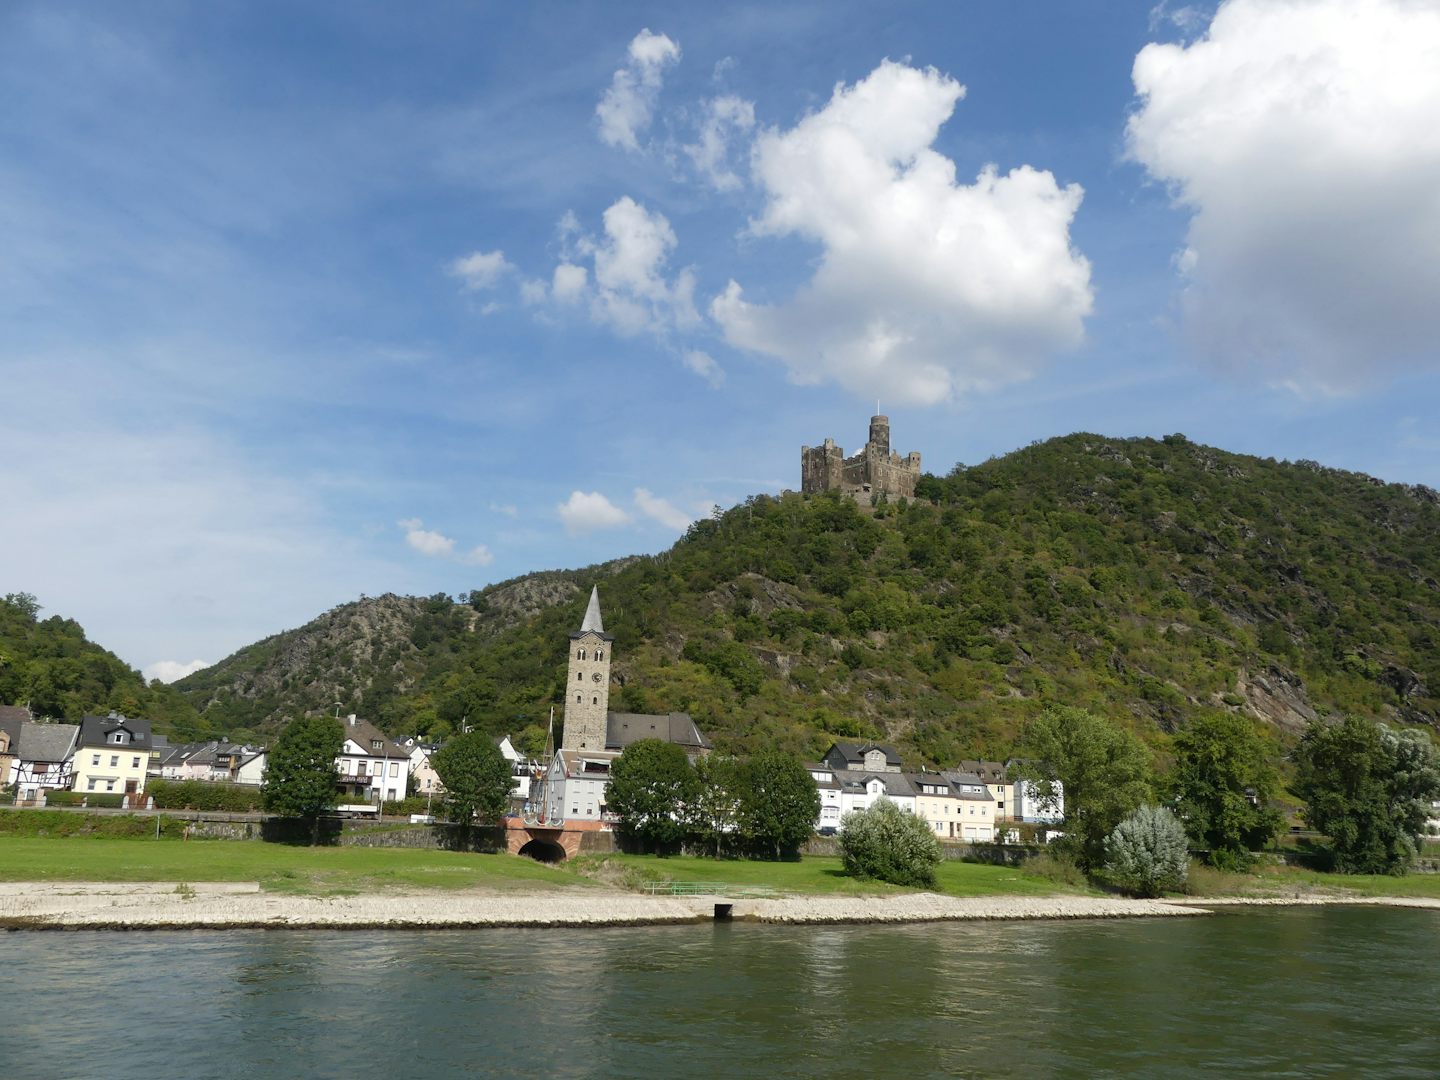 One of the scenic castles on the Rhine River